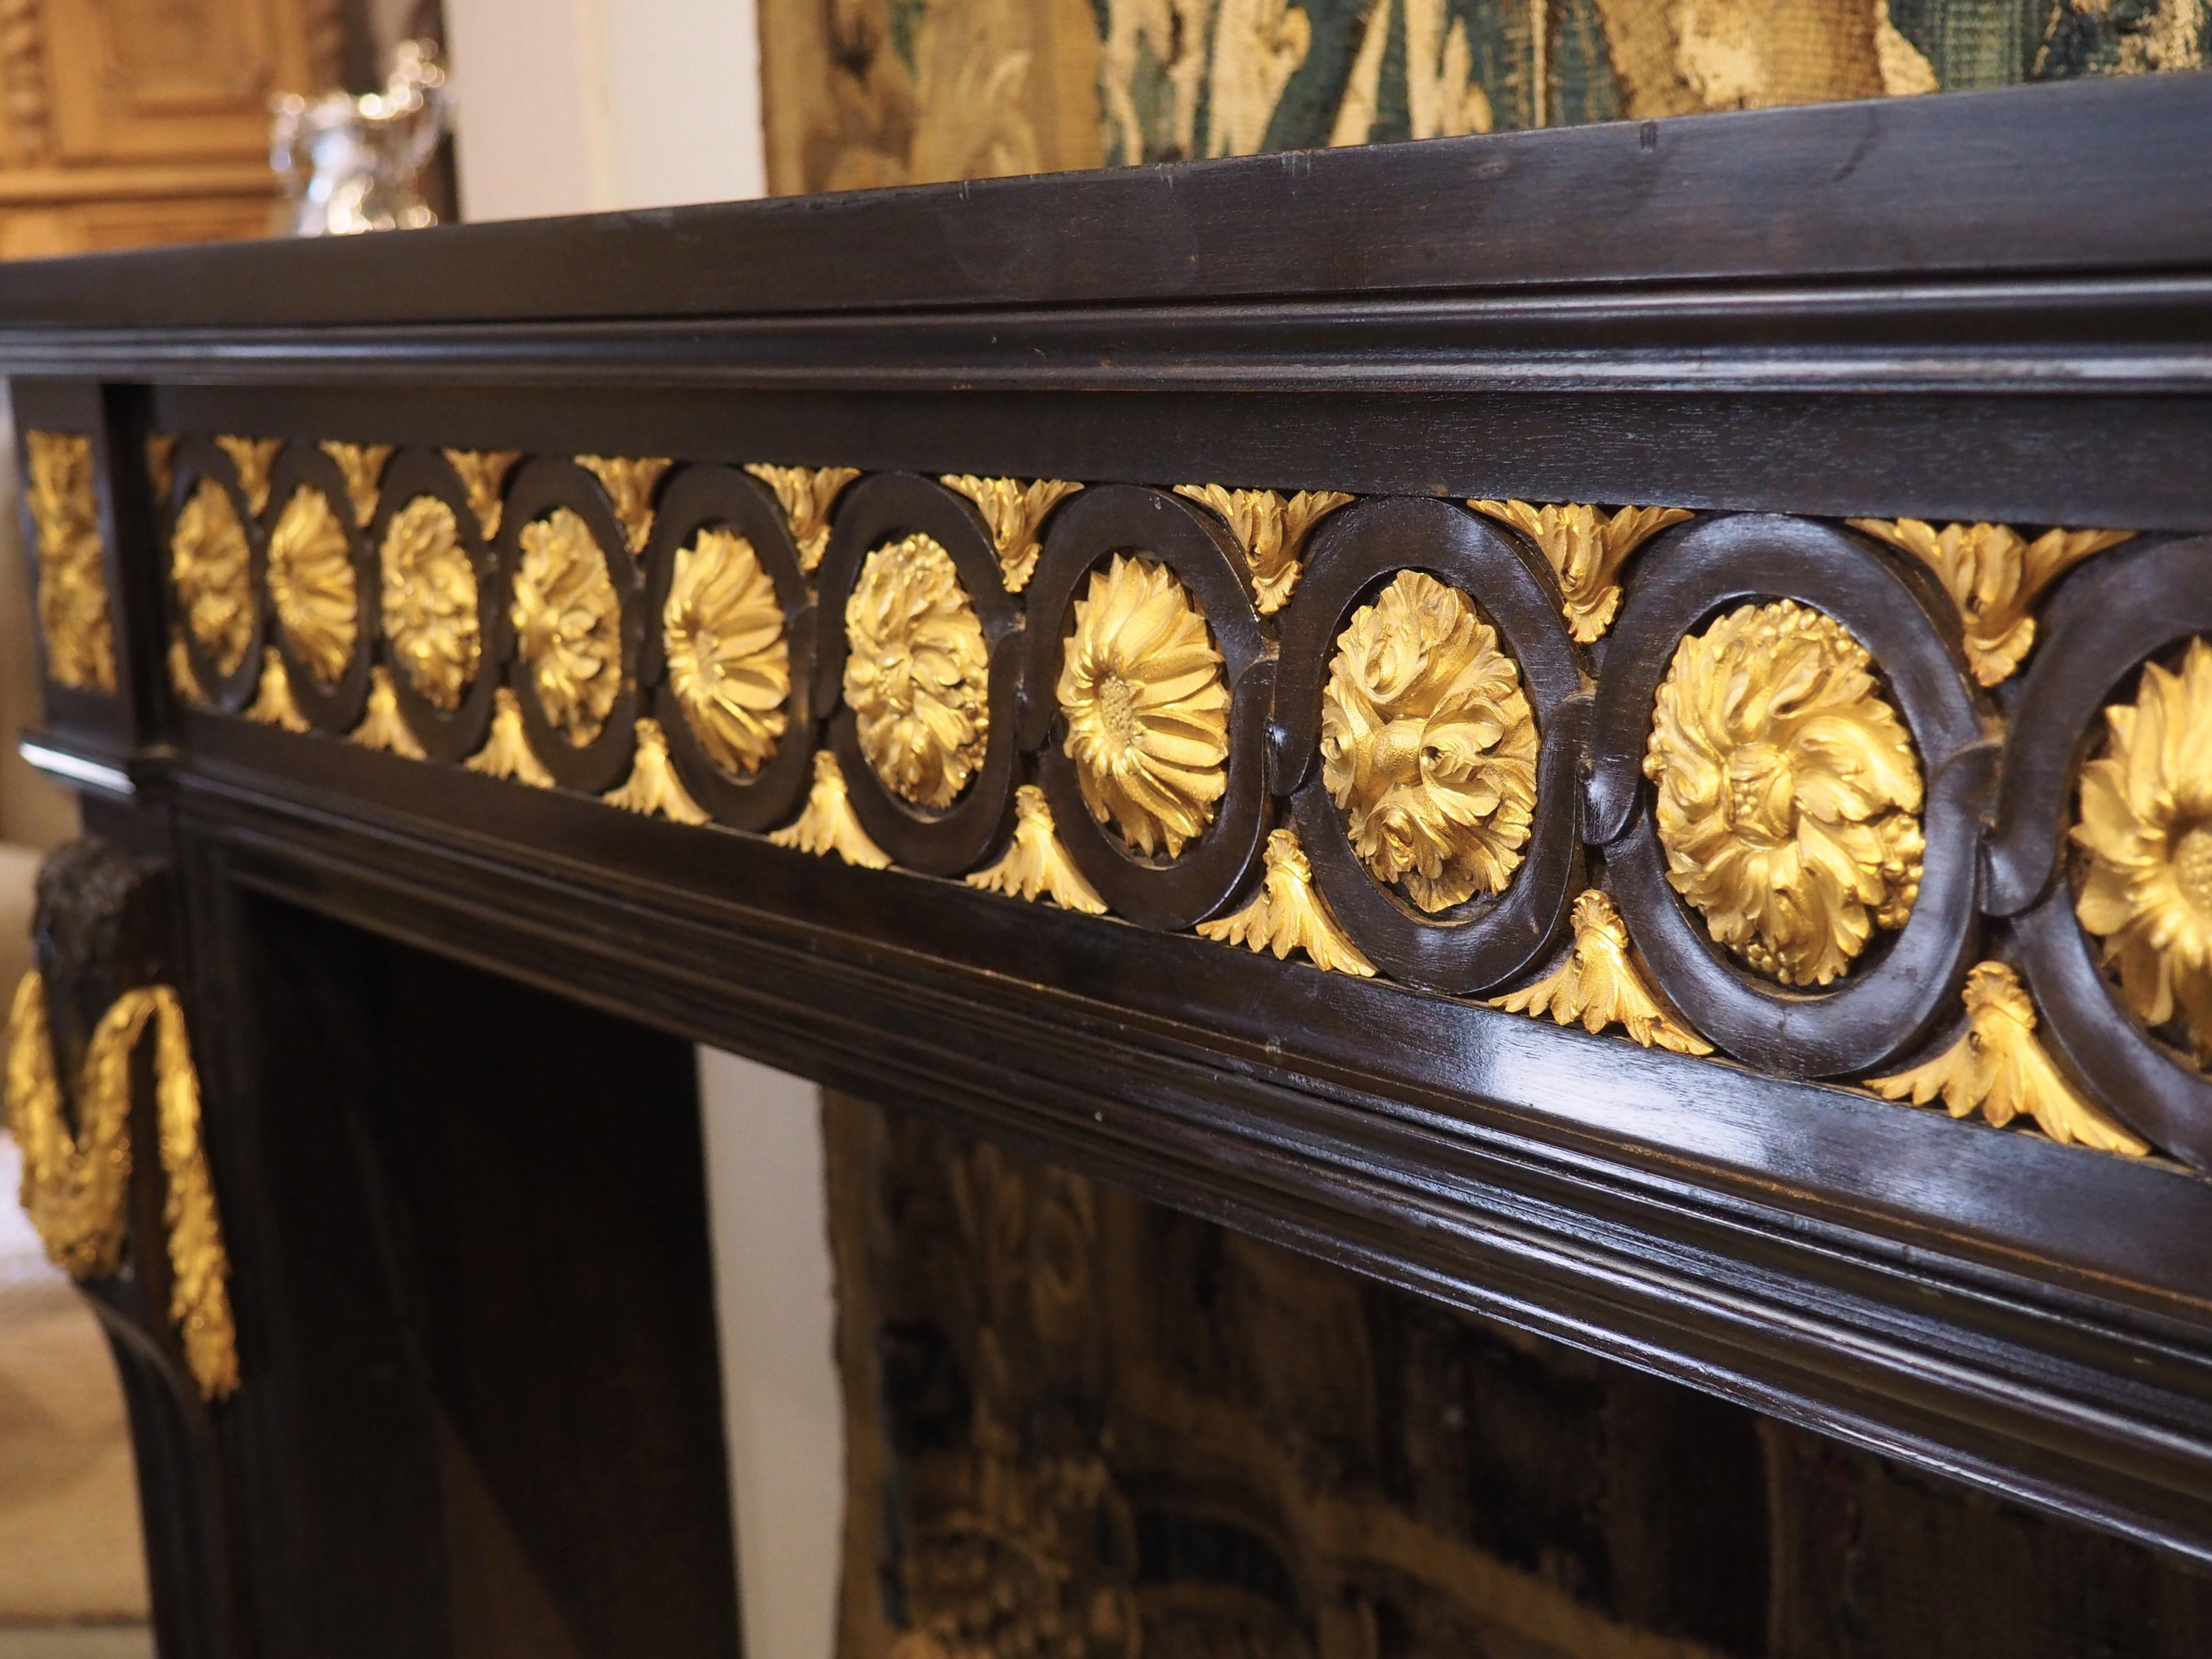 Hand-carved in the style of Louis XVI, this striking French wood mantel dates to the 1900s. Decorative motifs during the reign of Louis XVI were inspired by ancient civilizations (Rome, Greece, Egypt, etc.), thanks to the rediscoveries of Pompeii